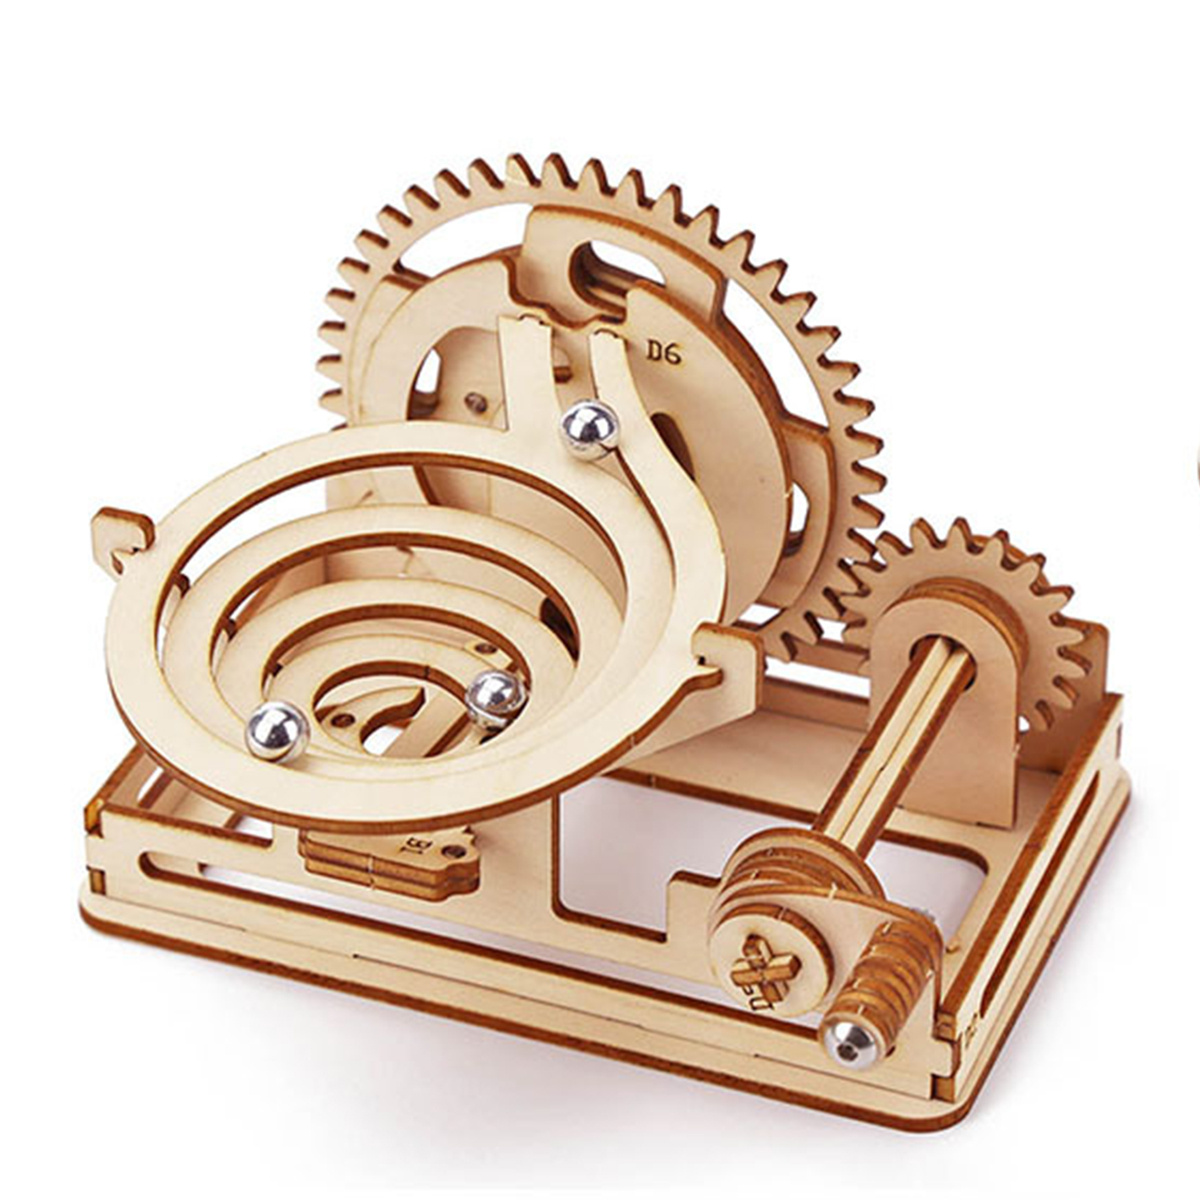 

Spiral 3d Wooden Puzzles For Adults And Teens Diy Model Building Kits With Mechanical Puzzles